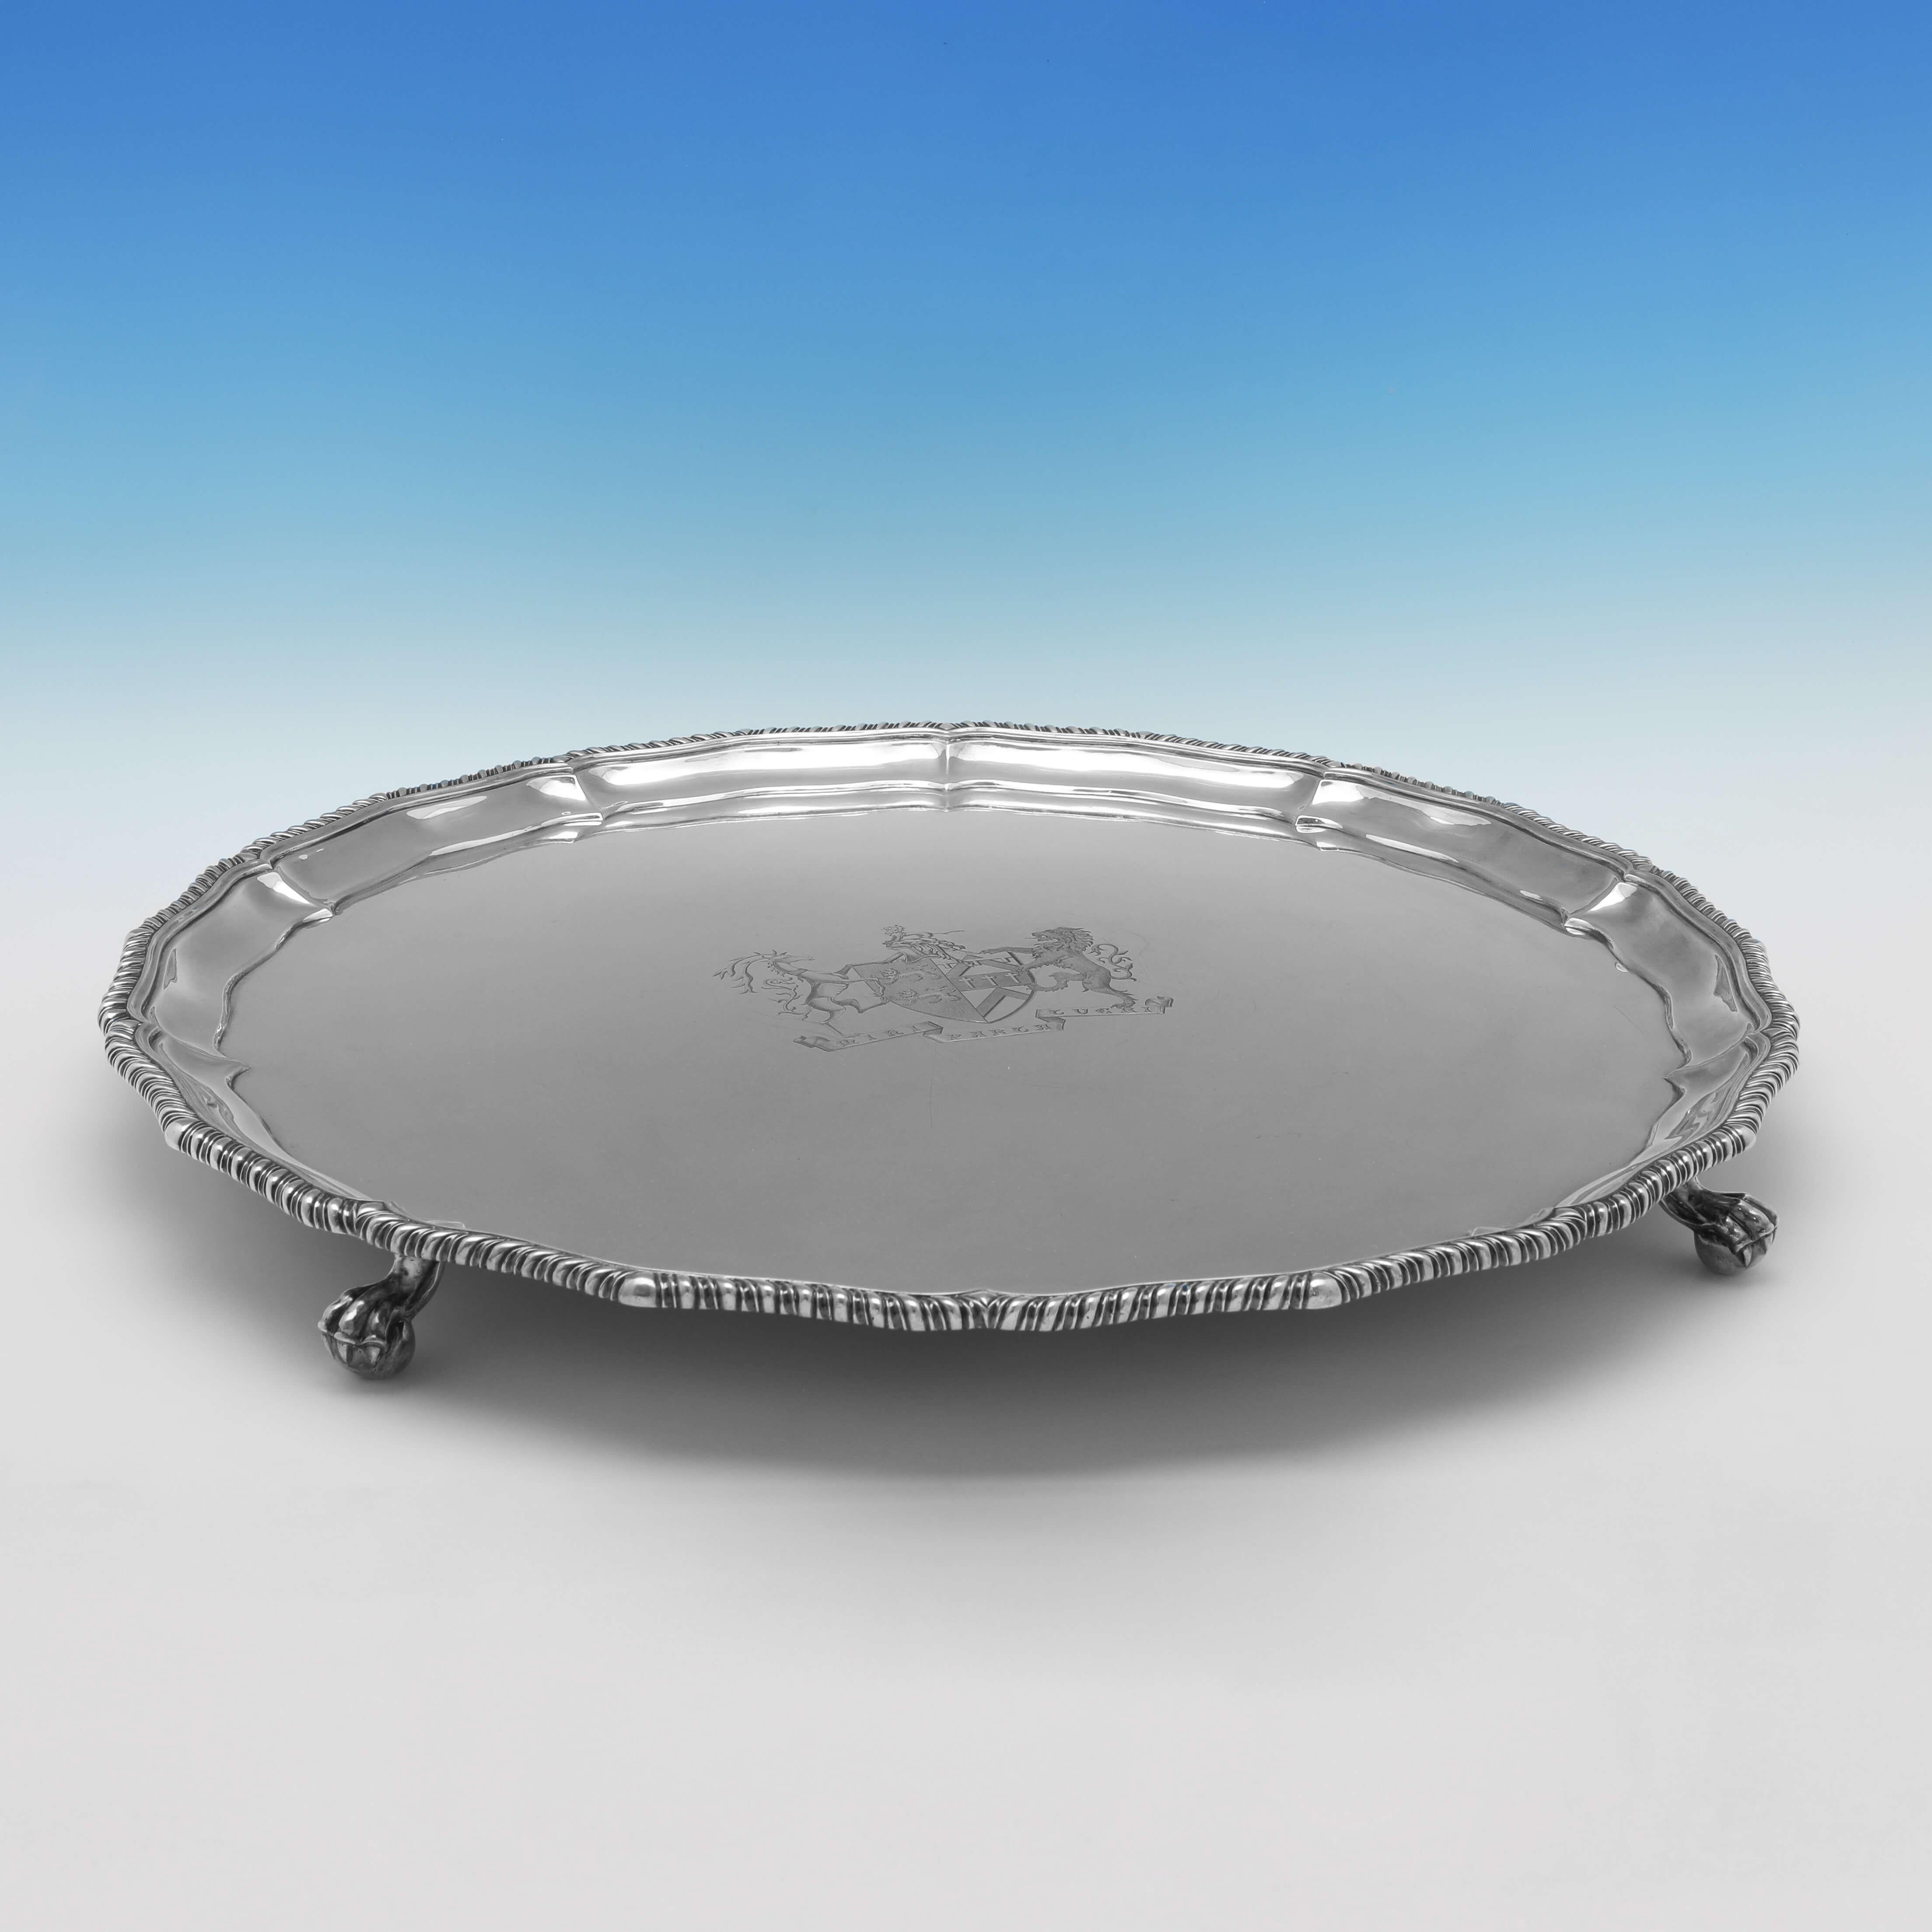 Hallmarked in London in 1874 by Edward Kerr Reid, this incredible, Victorian, Antique Sterling Silver Salver, stands on four feet, and features a gadroon border and an engraved coat of arms to the centre. The salver measures 2.25